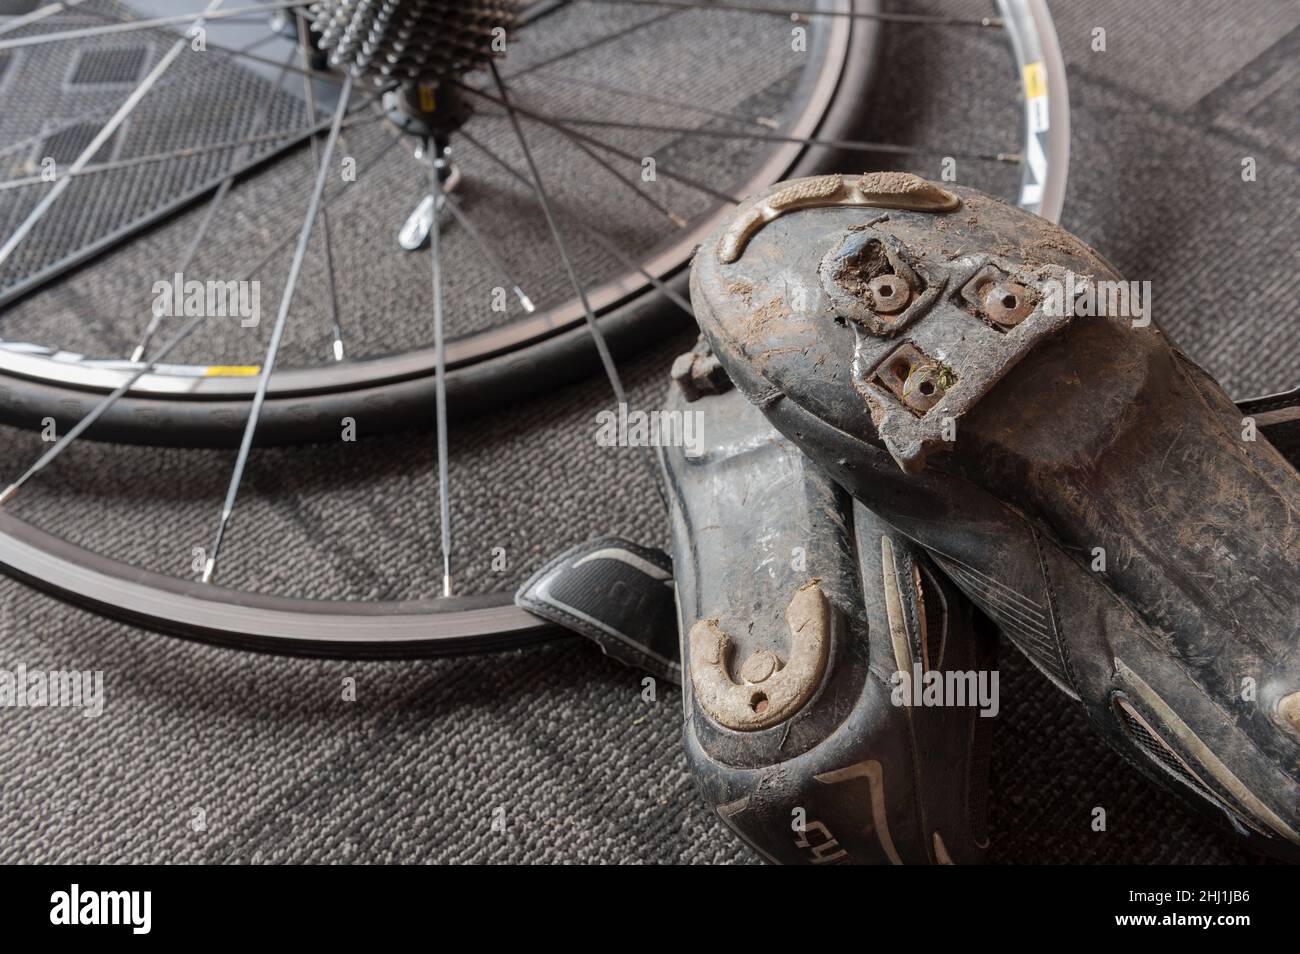 Worn cycling cleats to be replaced when it becomes difficult to release rider from the pedal possible cause of accident dangerous injury Stock Photo